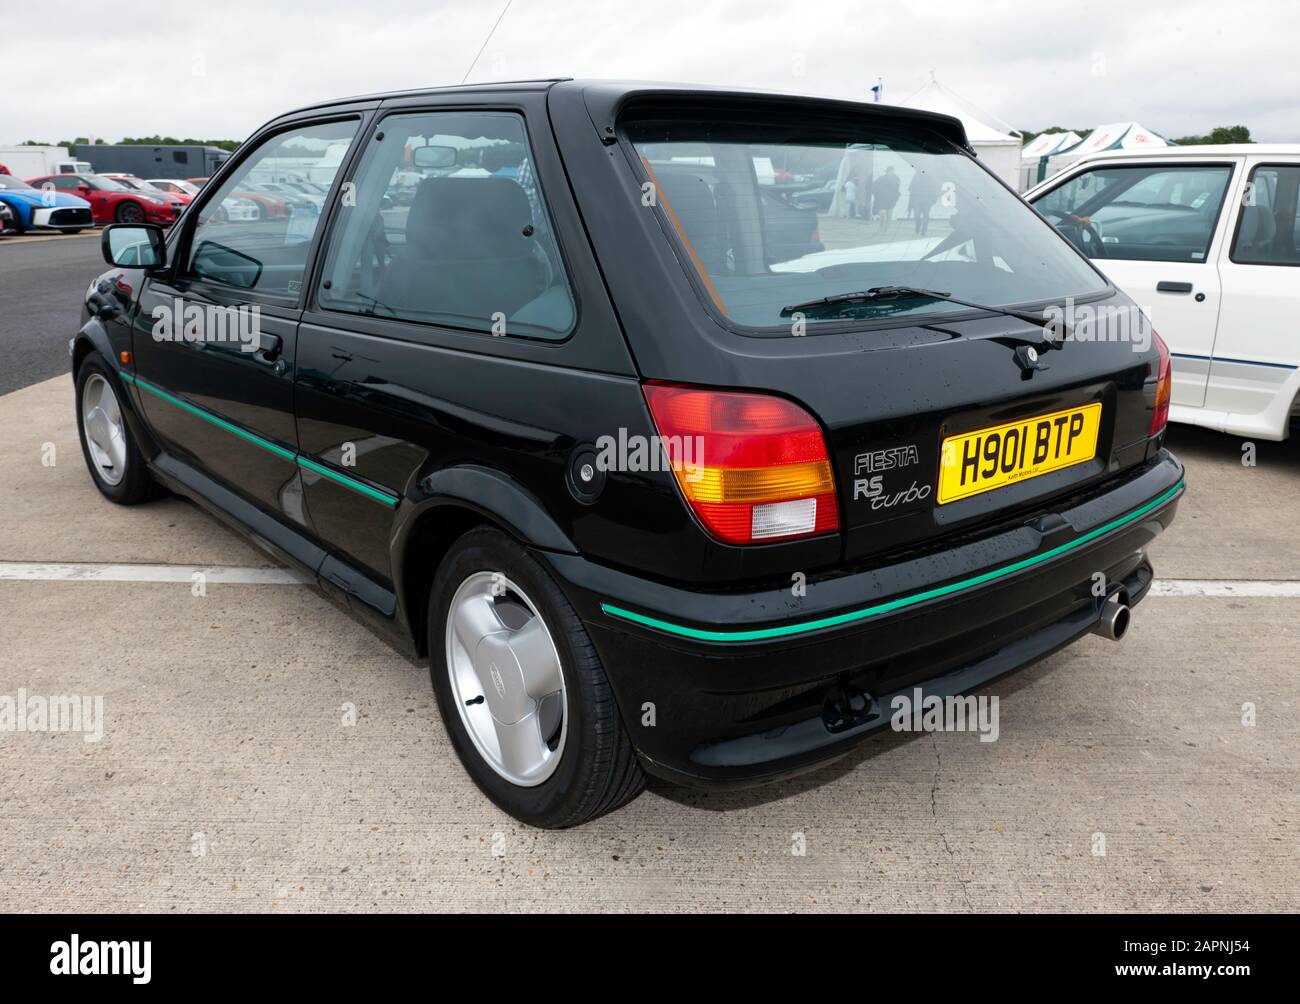 Three-quarter rear view of a Black, 1990, Ford Fiesta RS Turbo, on display at the 2019 Silverstone Classic Stock Photo